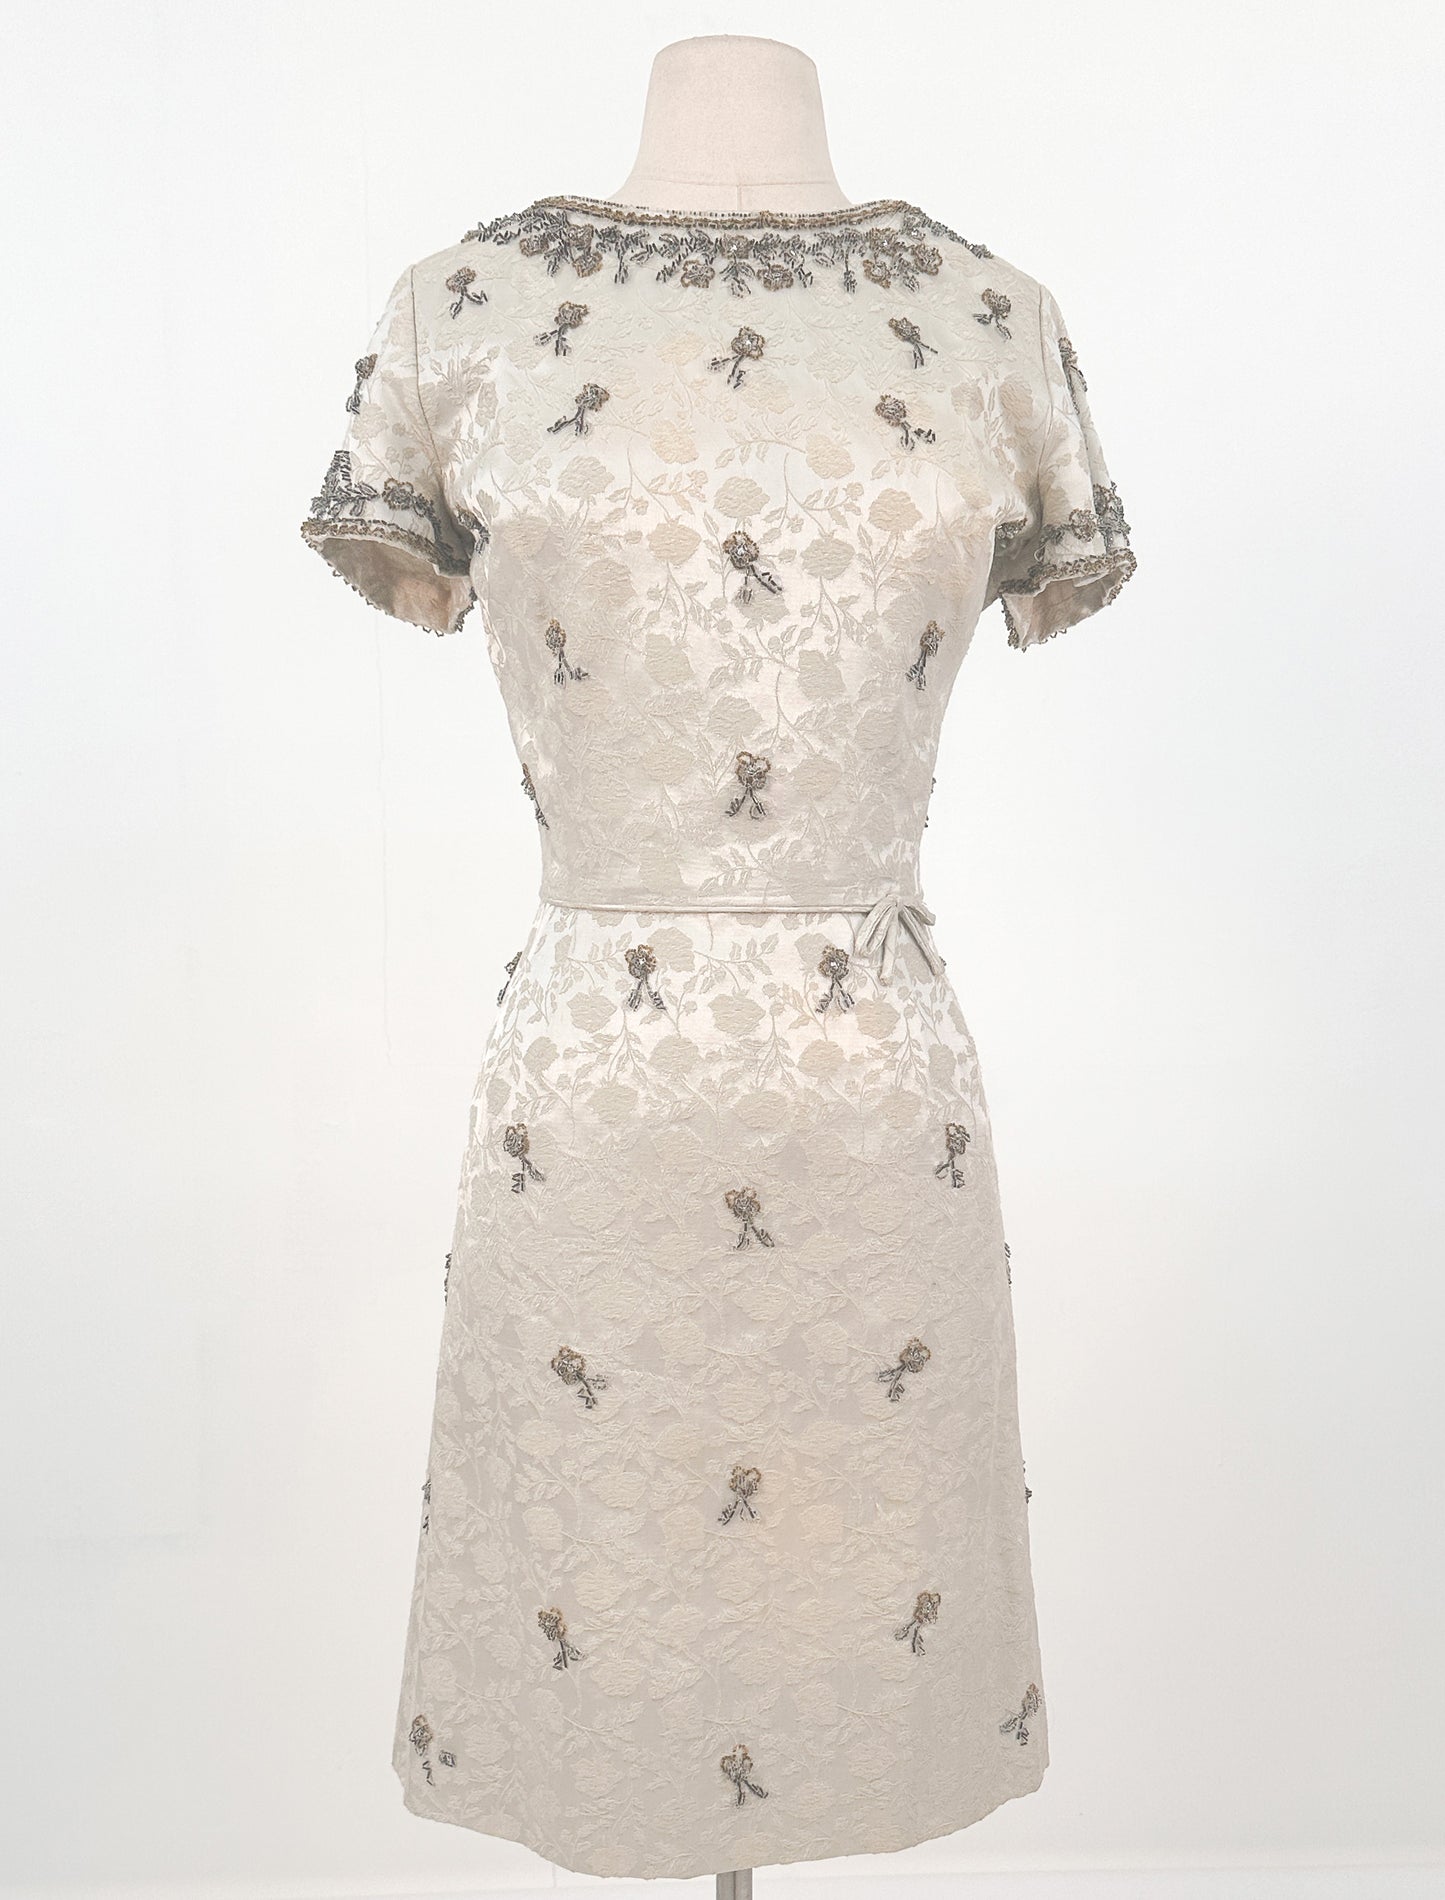 1950s Taupe and Gold Beaded Brocade Dress / Waist 30